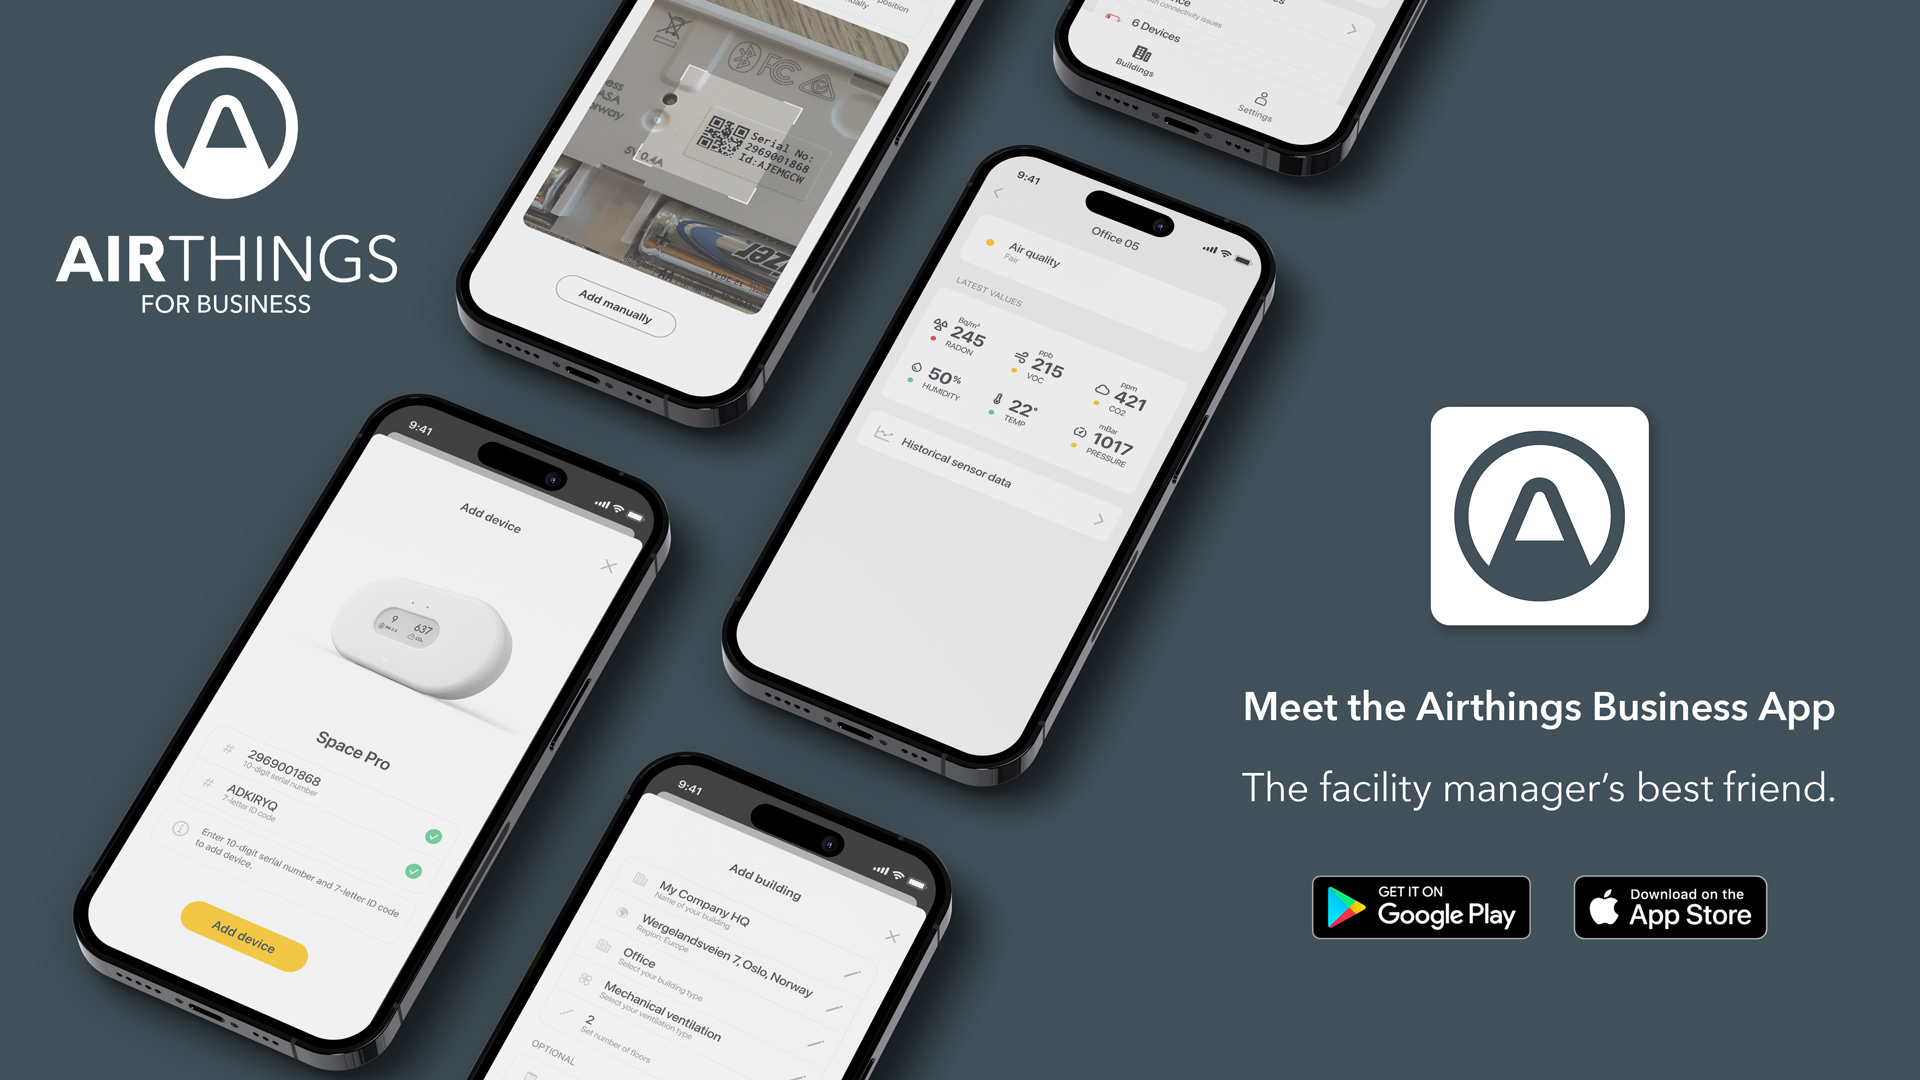 The Airthings Business App